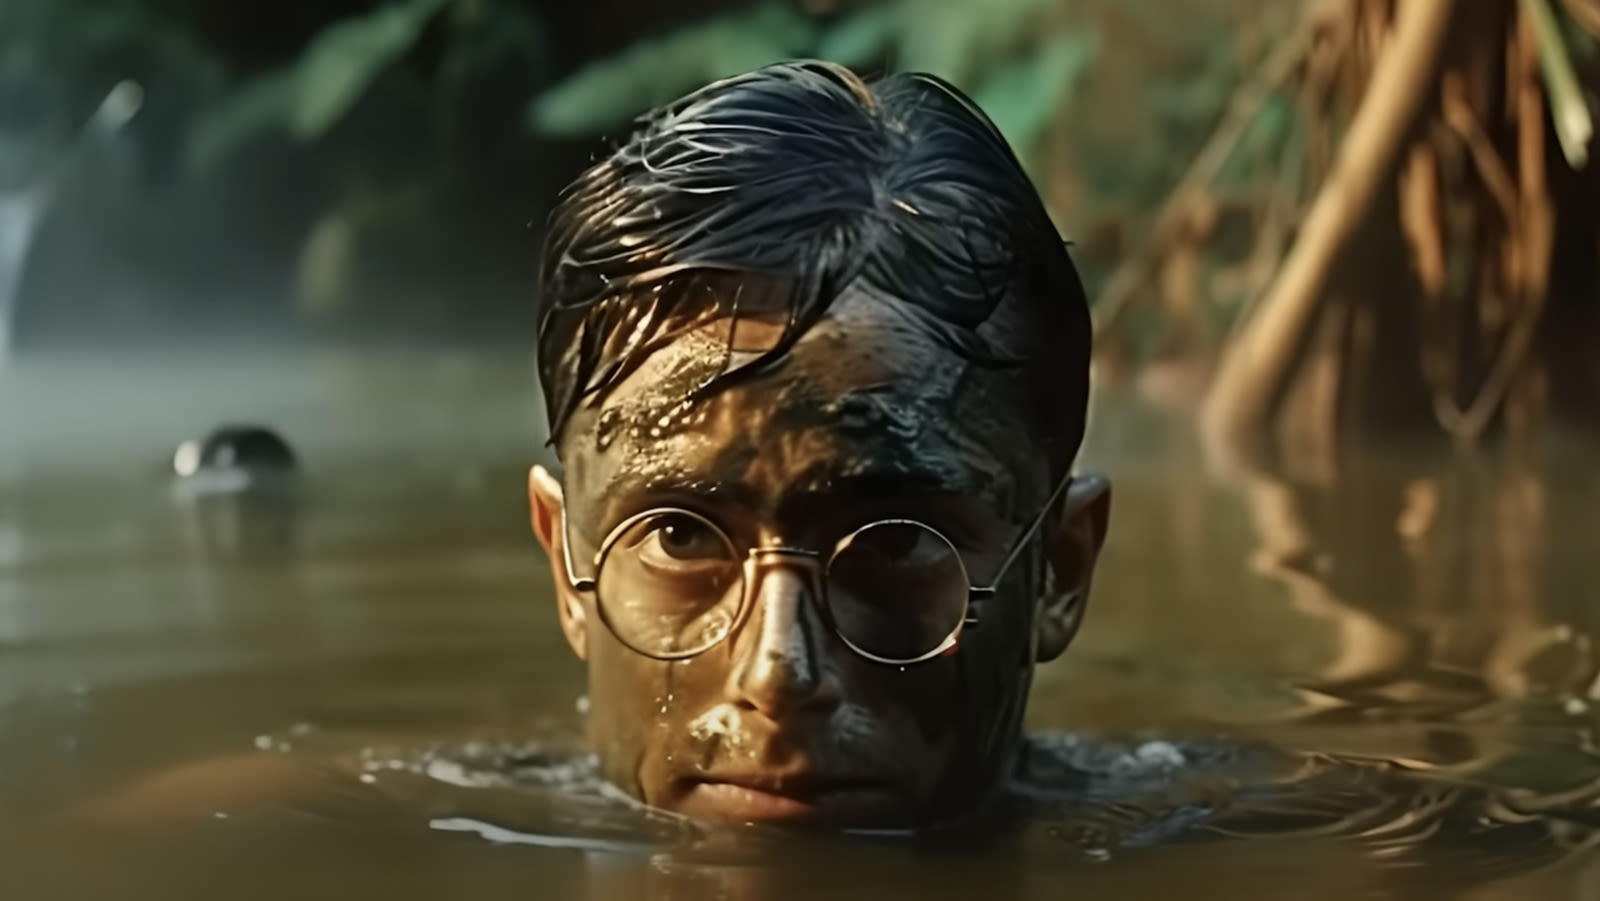 Harry Potter In The Vietnam War Is The Most Outrageous AI Movie Trailer Yet - Looper